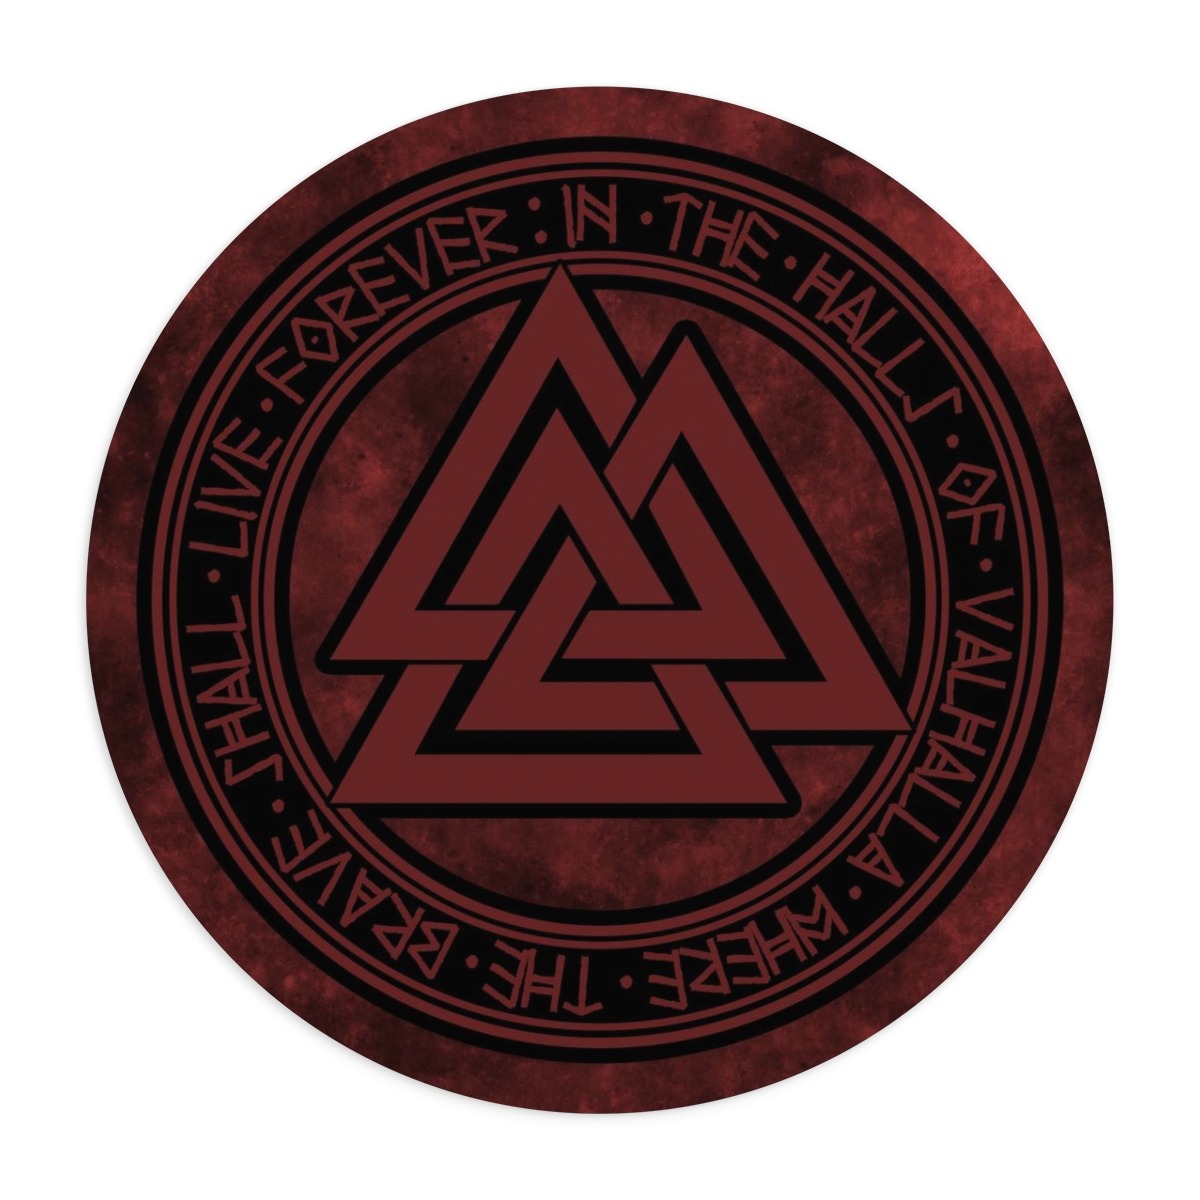 Red Valknut Mouse Pad